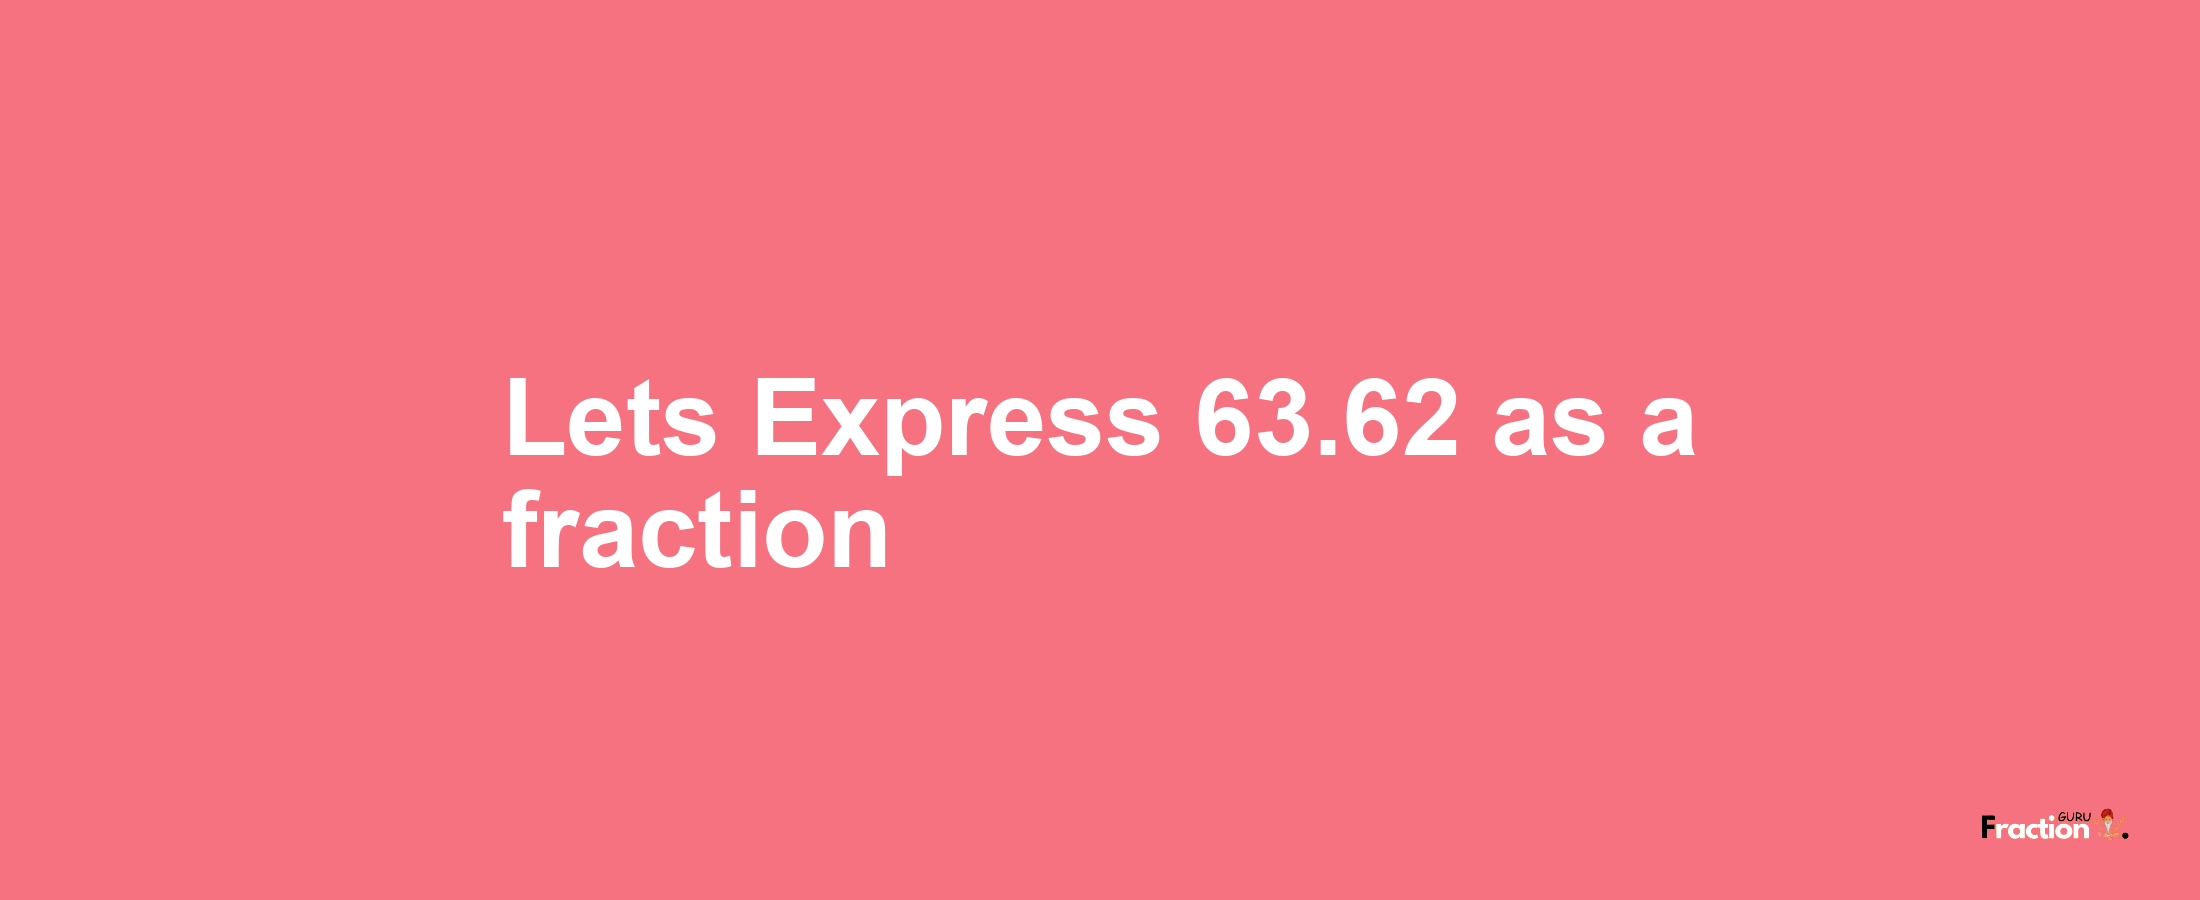 Lets Express 63.62 as afraction